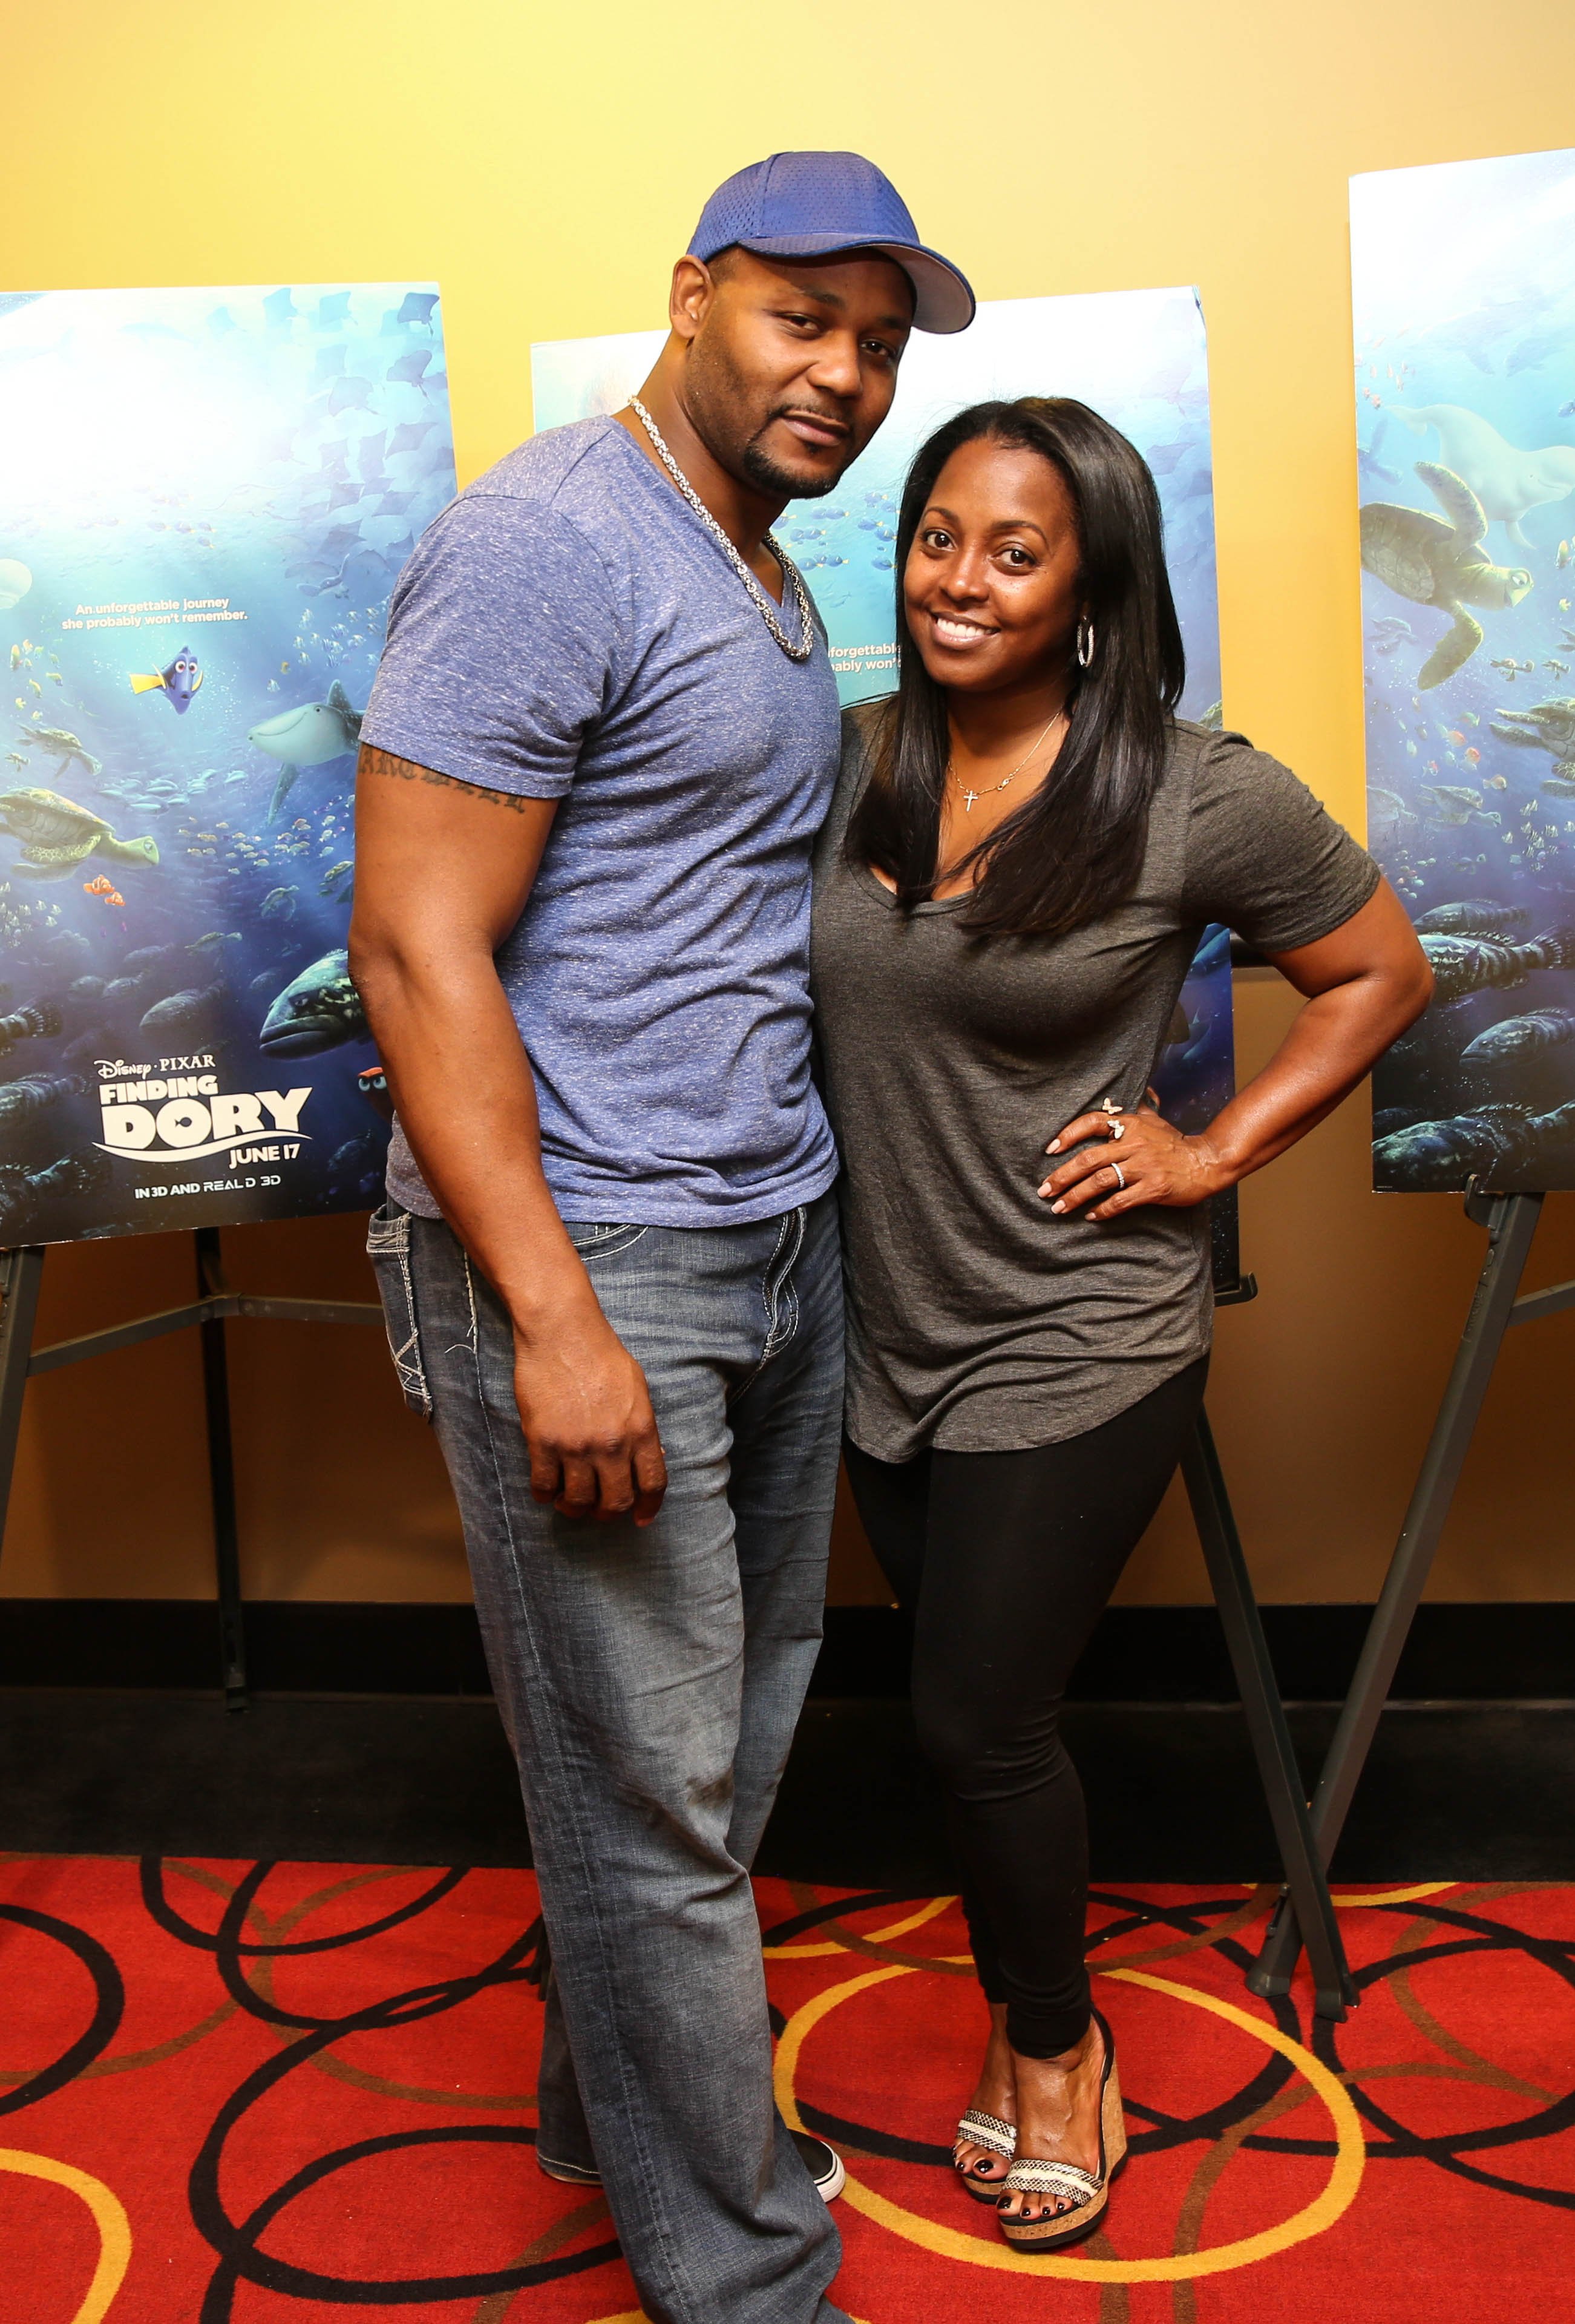 Keshia Knight Pulliam & Ed Hartwell at “Finding Dory” advance screening on June 15, 2016 in Georgia | Photo: Getty Images